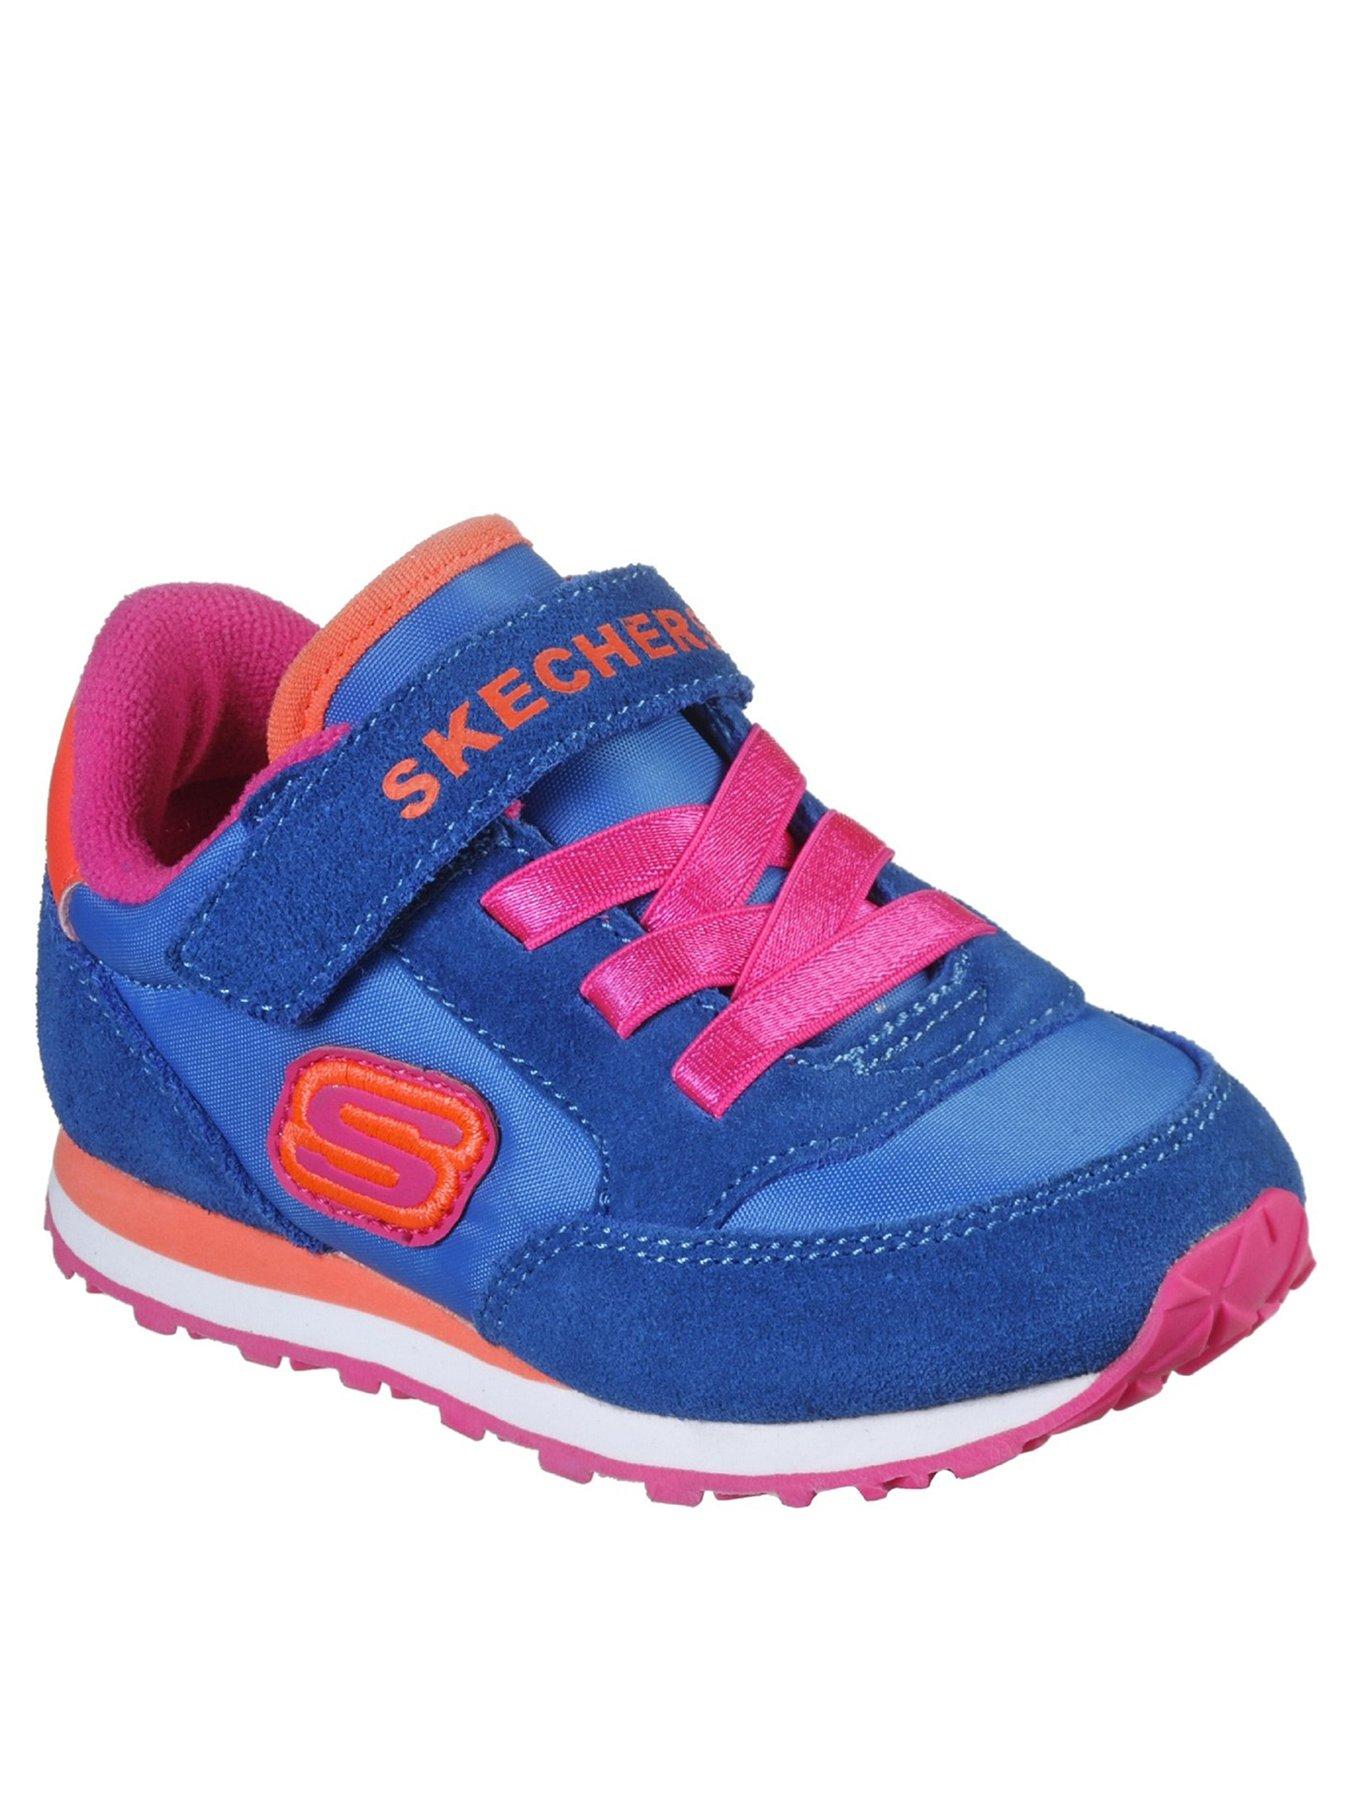 girls trainers blue